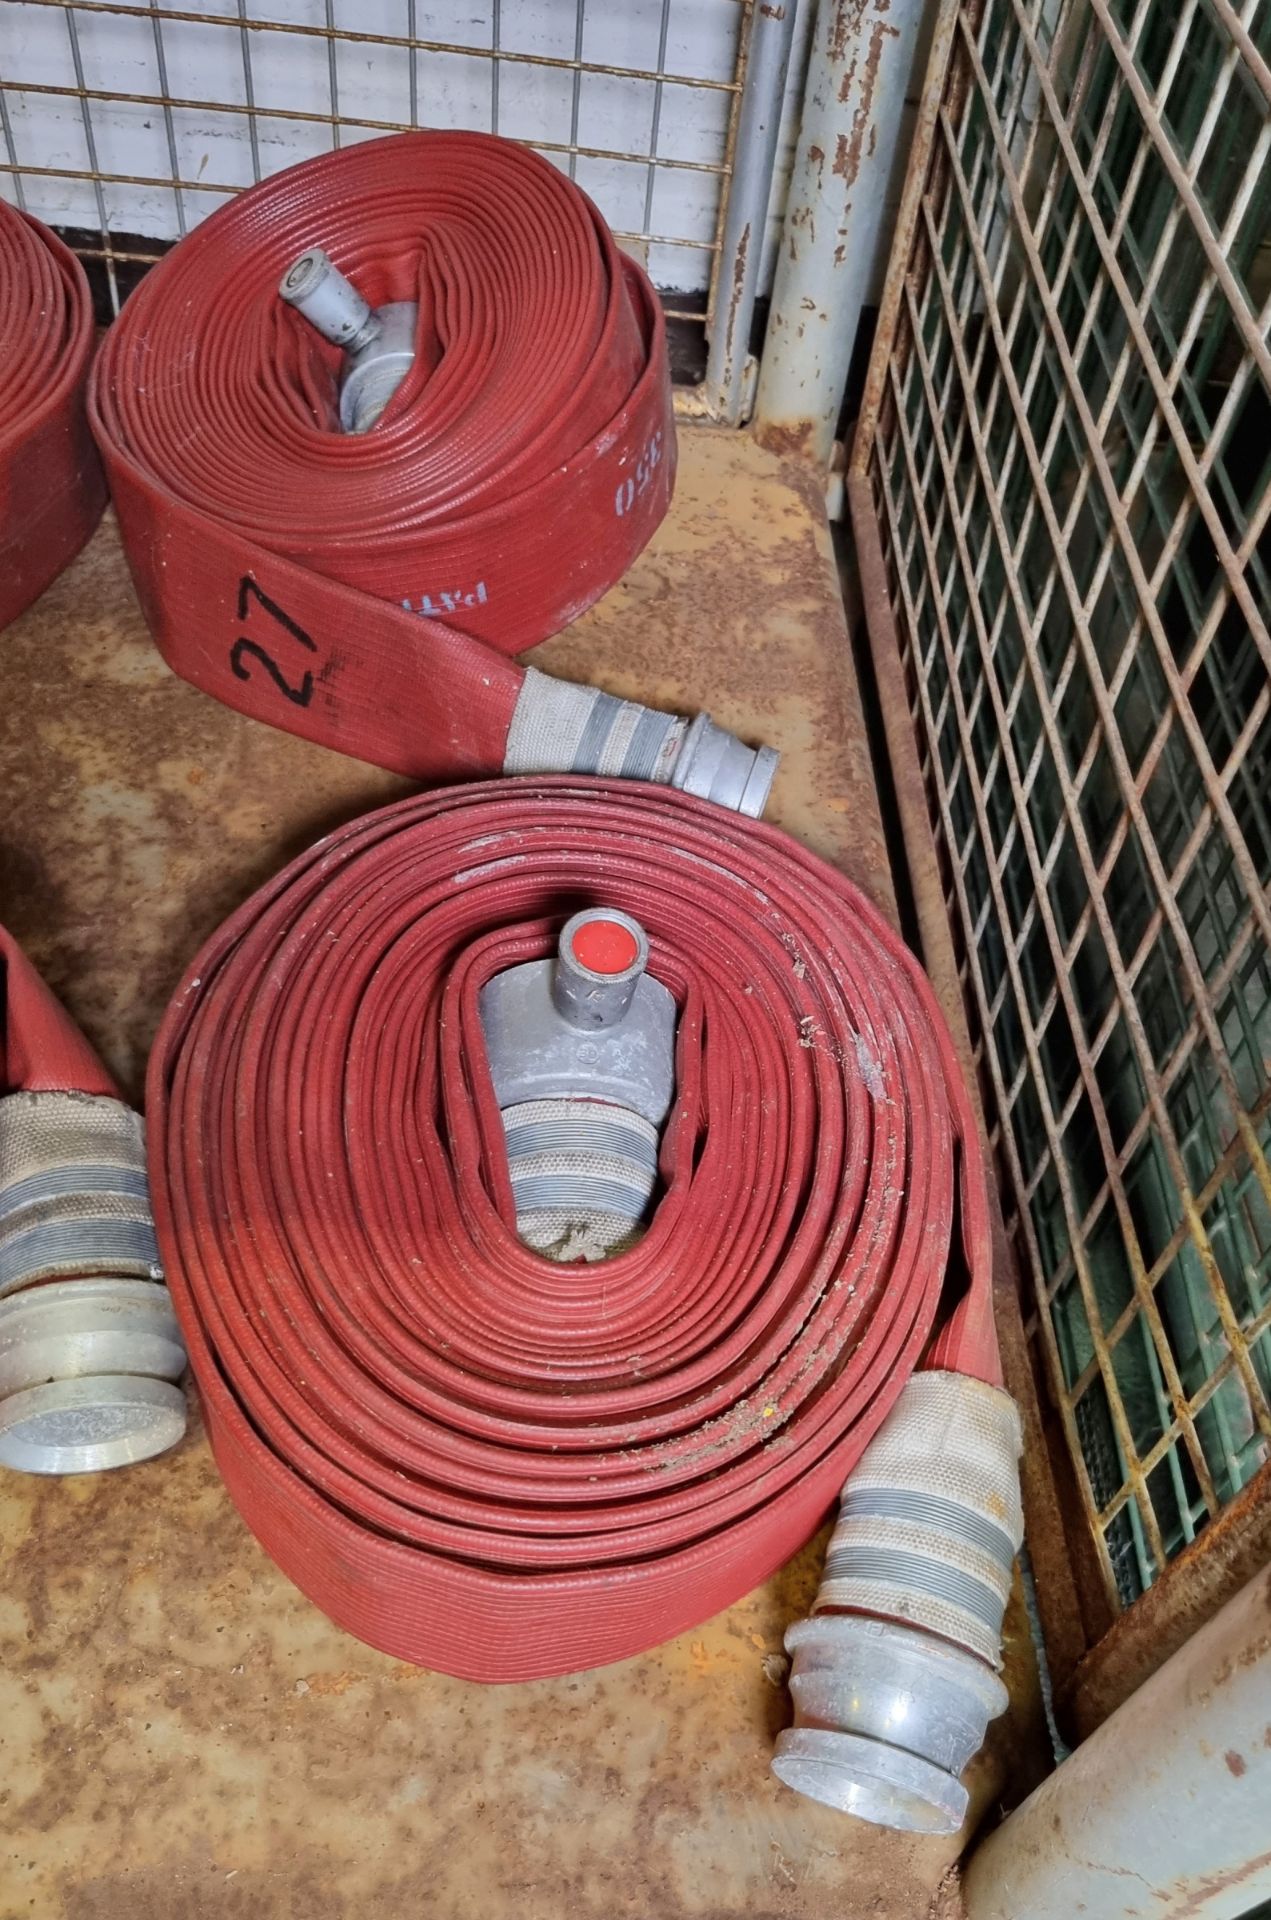 6x Angus Duraline 64mm lay flat hoses with couplings - approx 15m in length - Image 3 of 5